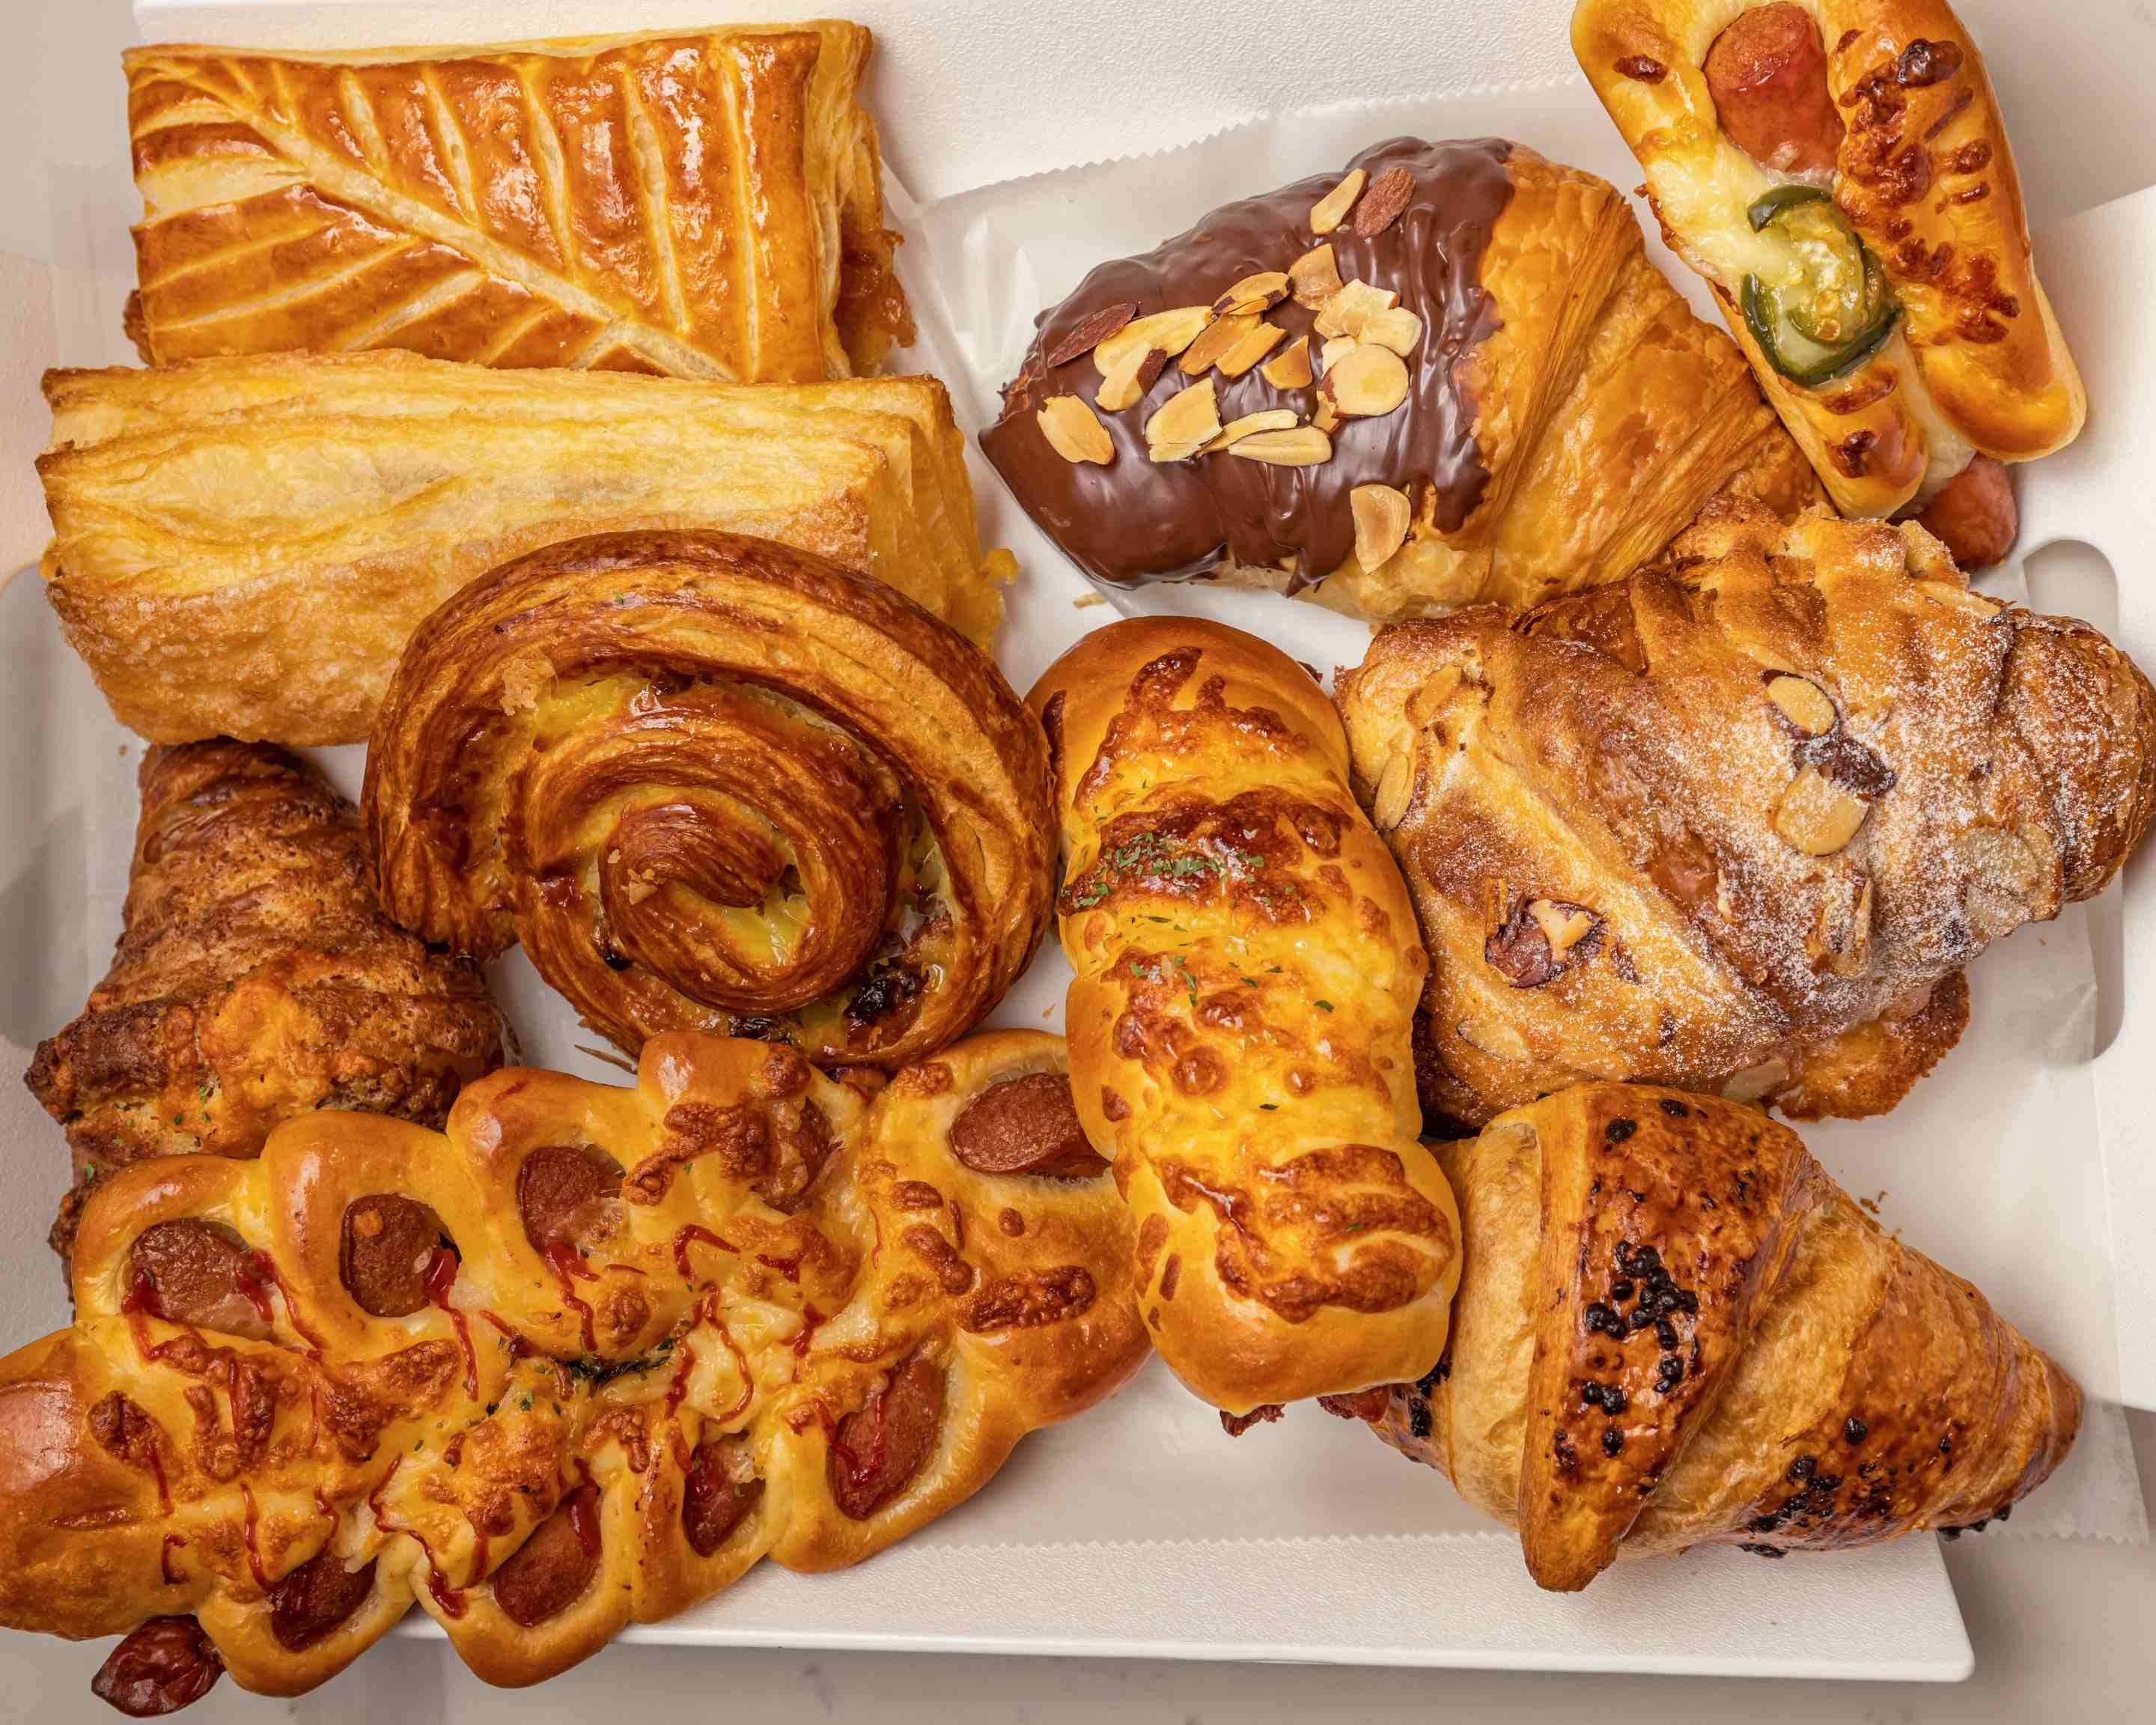 12 Best Chinese Bakeries in Los Angeles for Pastries, Breads and More